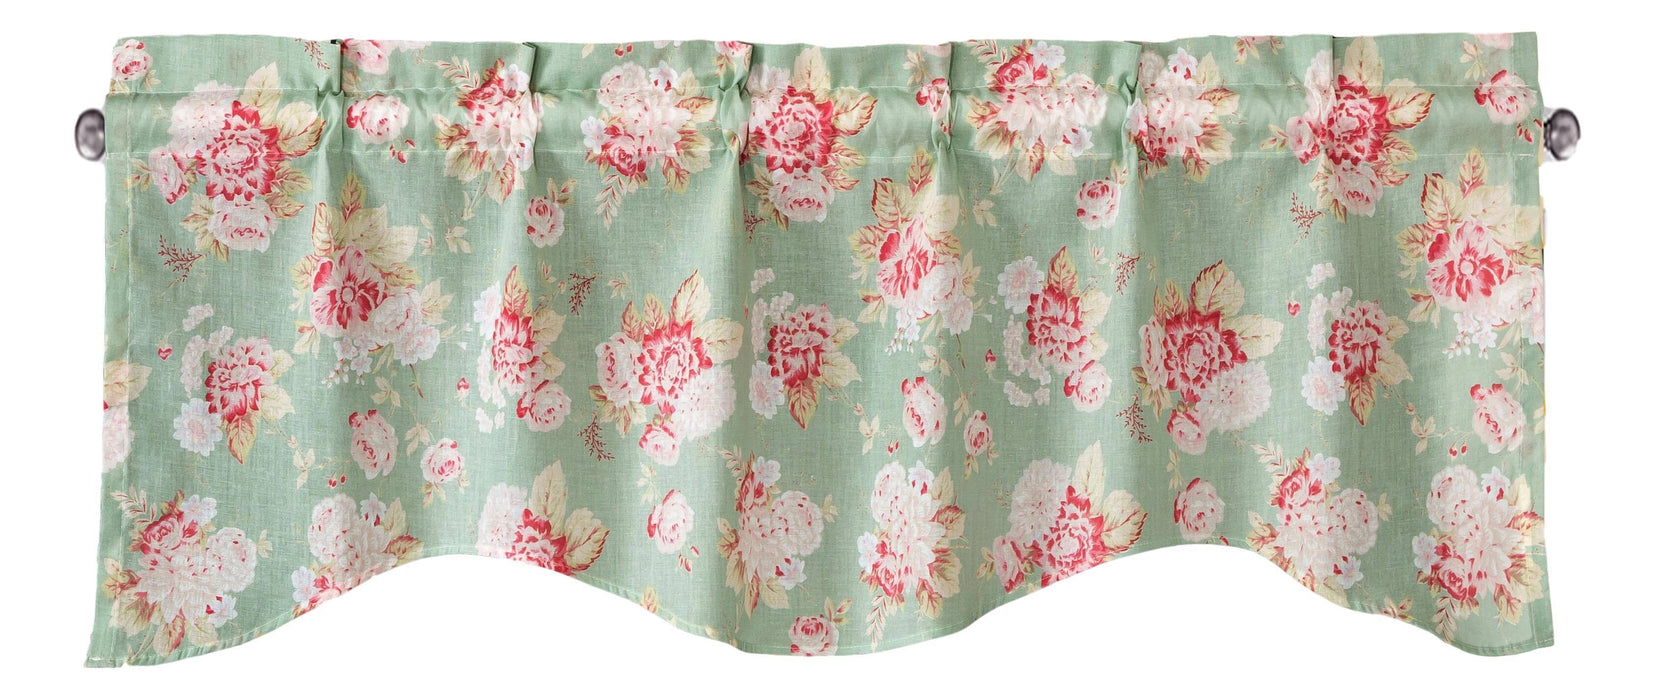 DaDa Bedding Hint of Mint Floral Pastel Roses Cottage Window Curtain Valance - 18" x 52" (JHW-3036)